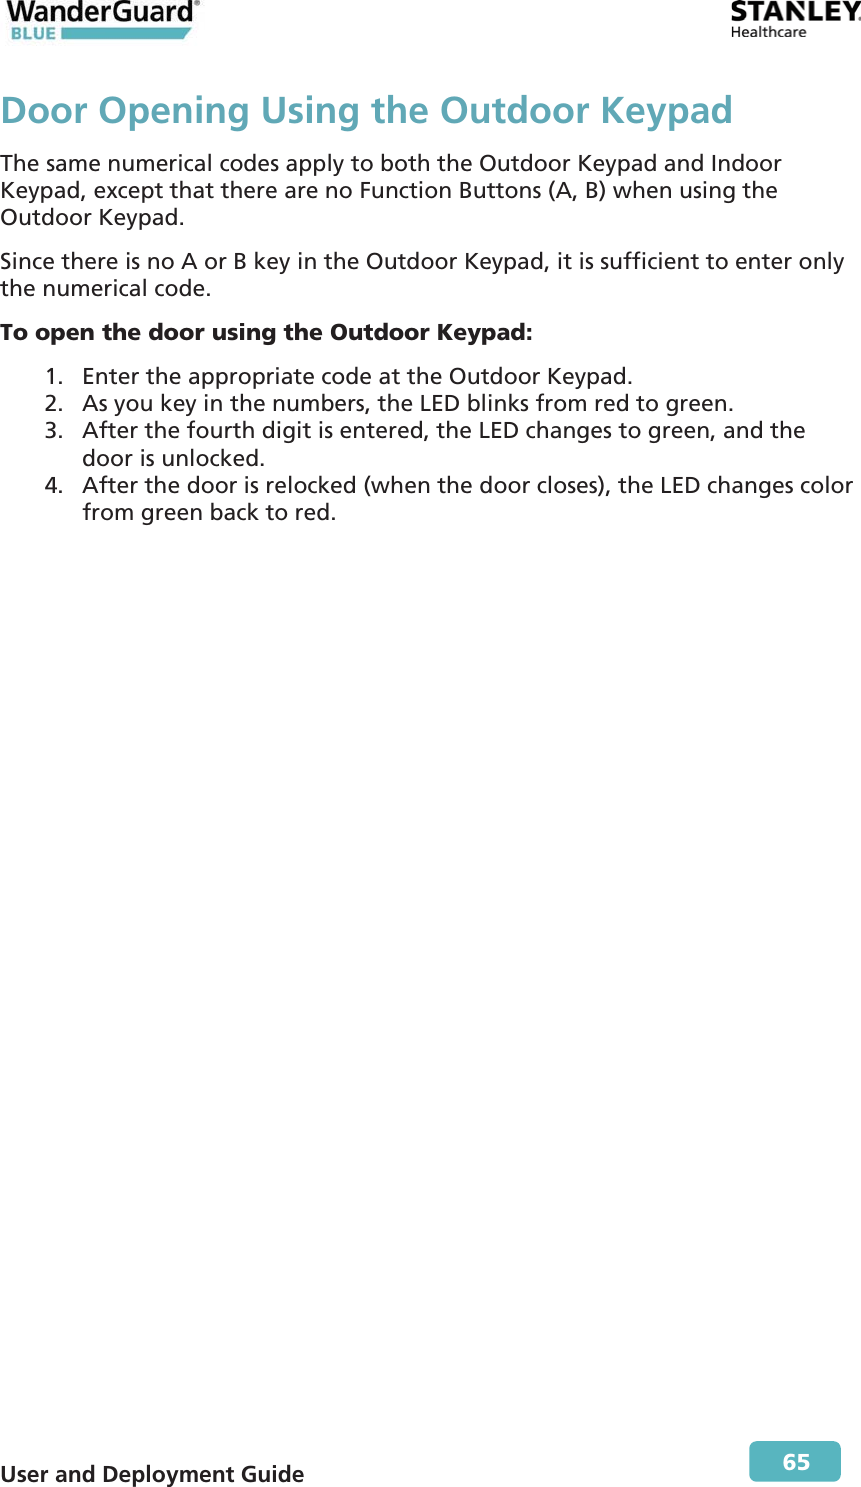  User and Deployment Guide        65 Door Opening Using the Outdoor KeypadThe same numerical codes apply to both the Outdoor Keypad and Indoor Keypad, except that there are no Function Buttons (A, B) when using the Outdoor Keypad. Since there is no A or B key in the Outdoor Keypad, it is sufficient to enter only the numerical code. To open the door using the Outdoor Keypad: 1. Enter the appropriate code at the Outdoor Keypad.  2. As you key in the numbers, the LED blinks from red to green.  3. After the fourth digit is entered, the LED changes to green, and the door is unlocked. 4. After the door is relocked (when the door closes), the LED changes color from green back to red. 